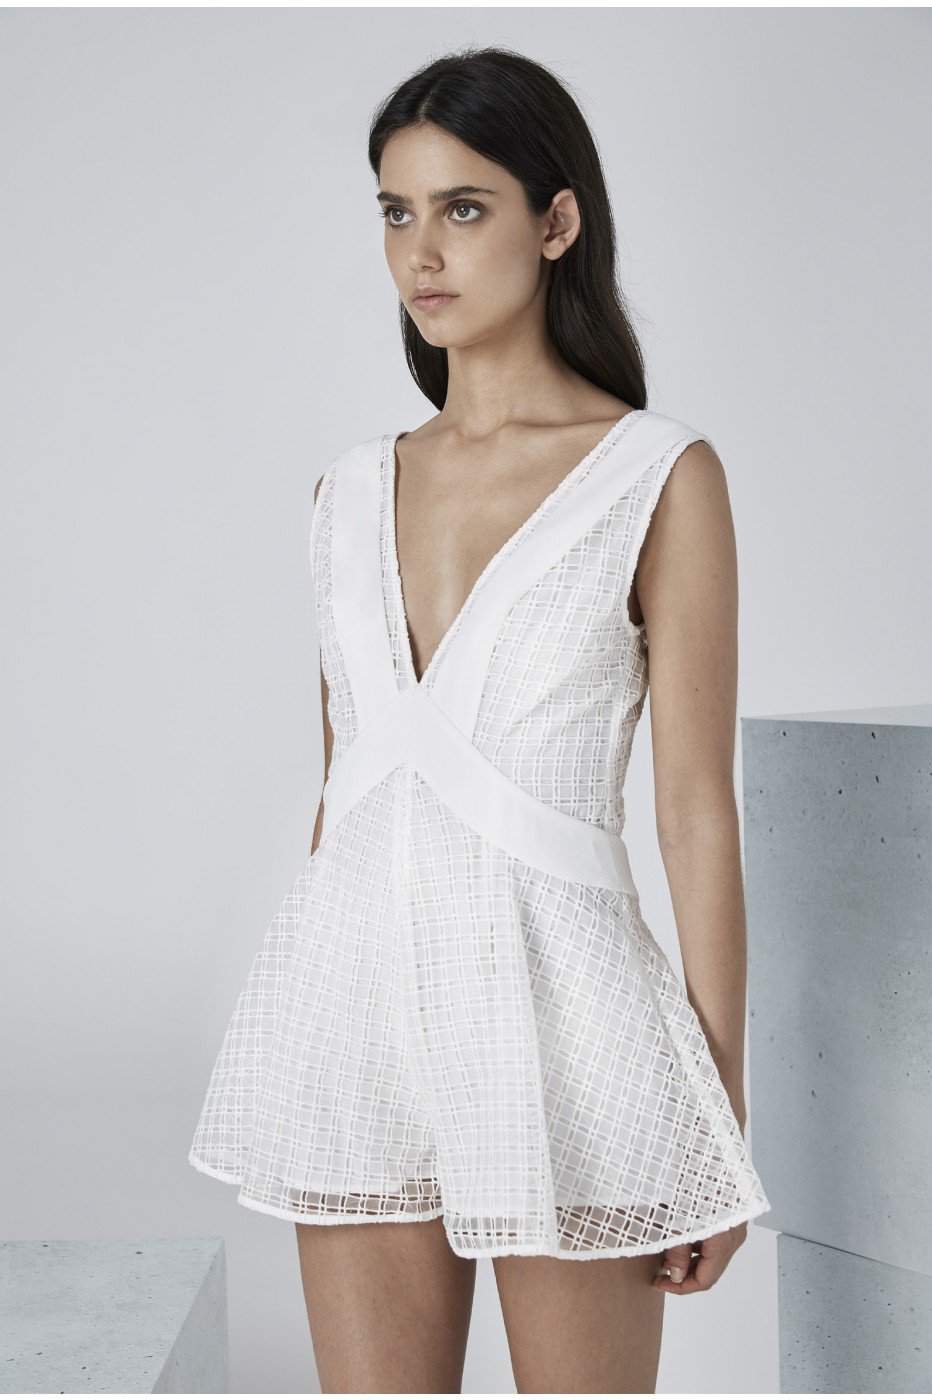 Finders Keepers Begin Playsuit In White | ModeSens